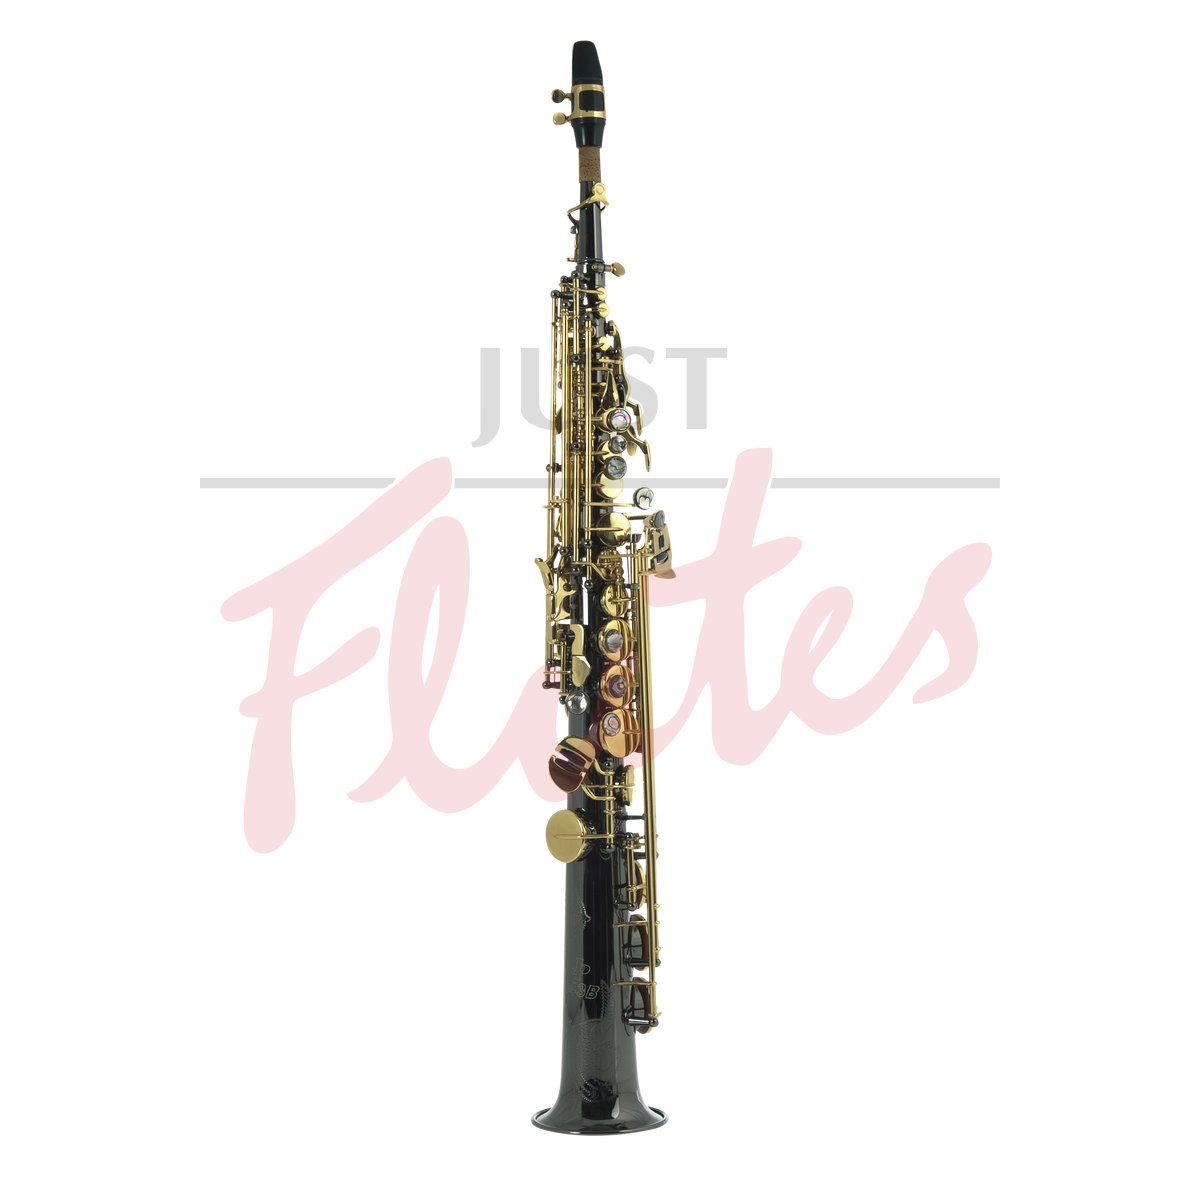 JP043B Soprano Saxophone, Black lacquer with Gold-plated keys